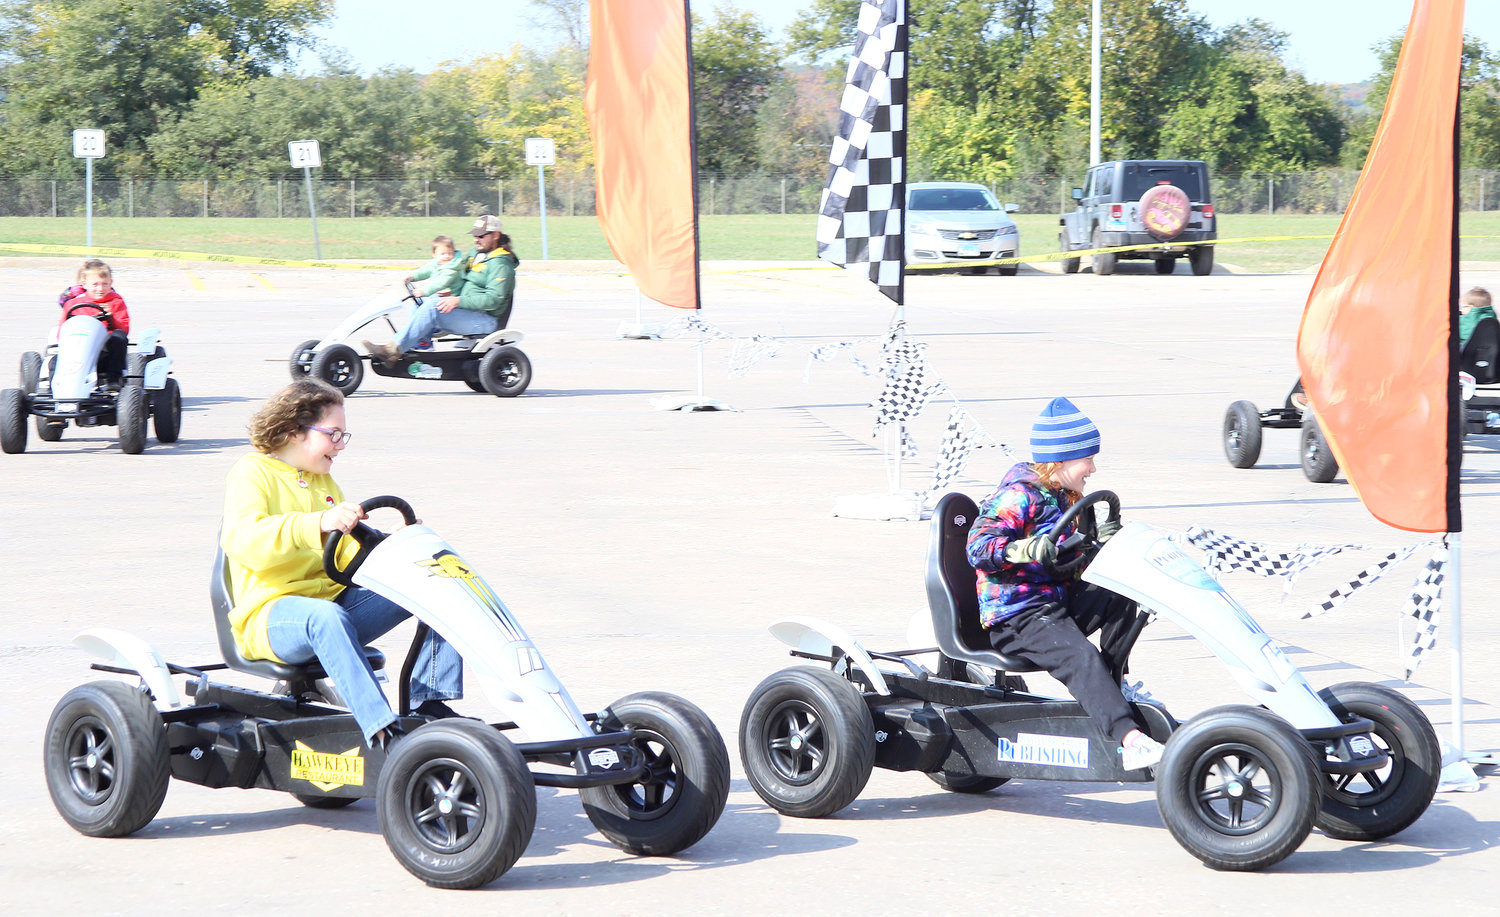 As part of Sunday's 50th anniversary at Conagra in Fort Madison, family member were able to race around in pedal-powered four-wheelers before touring the food-processing/packaging facility.